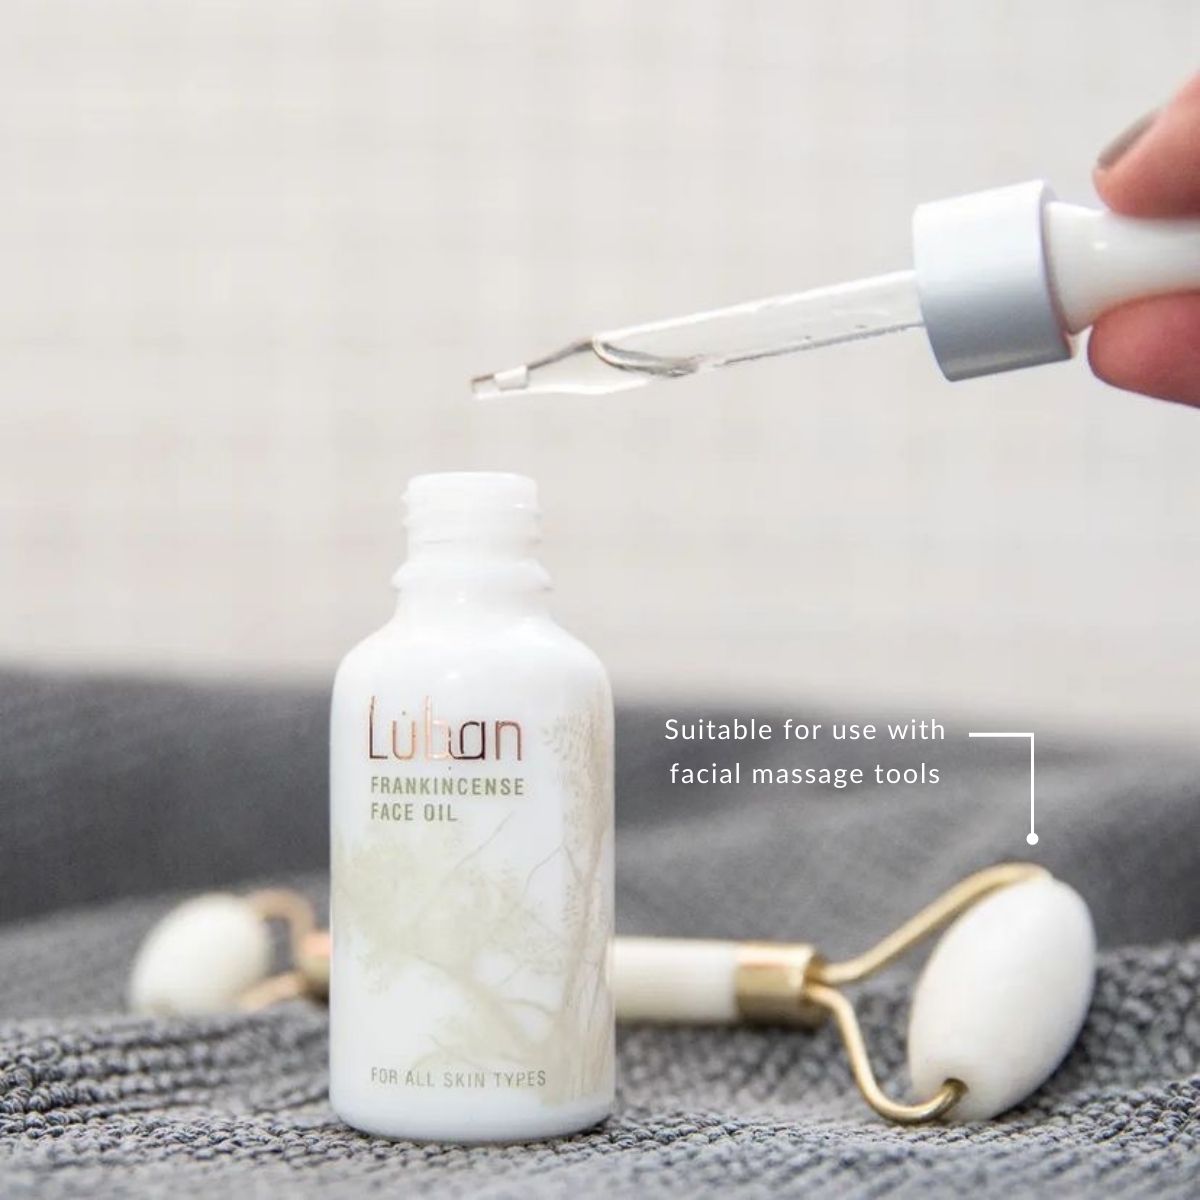 Luban face oil is suitable for use with manual facial massage tools